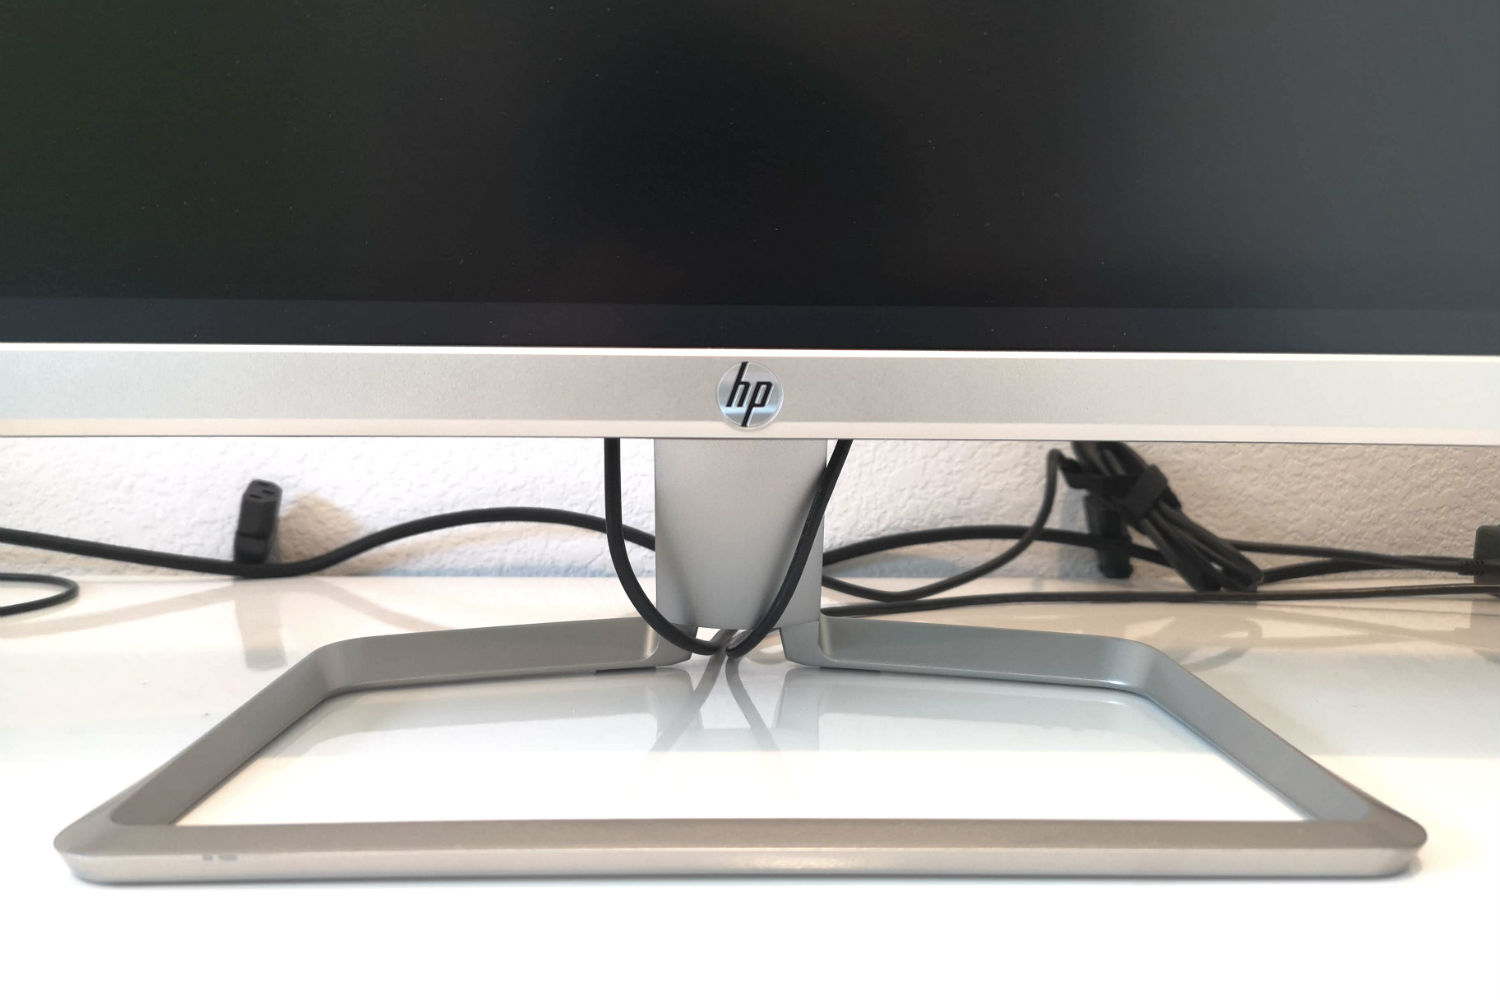 HP's f Monitor Review: A Premium Ultrawide Display for Less